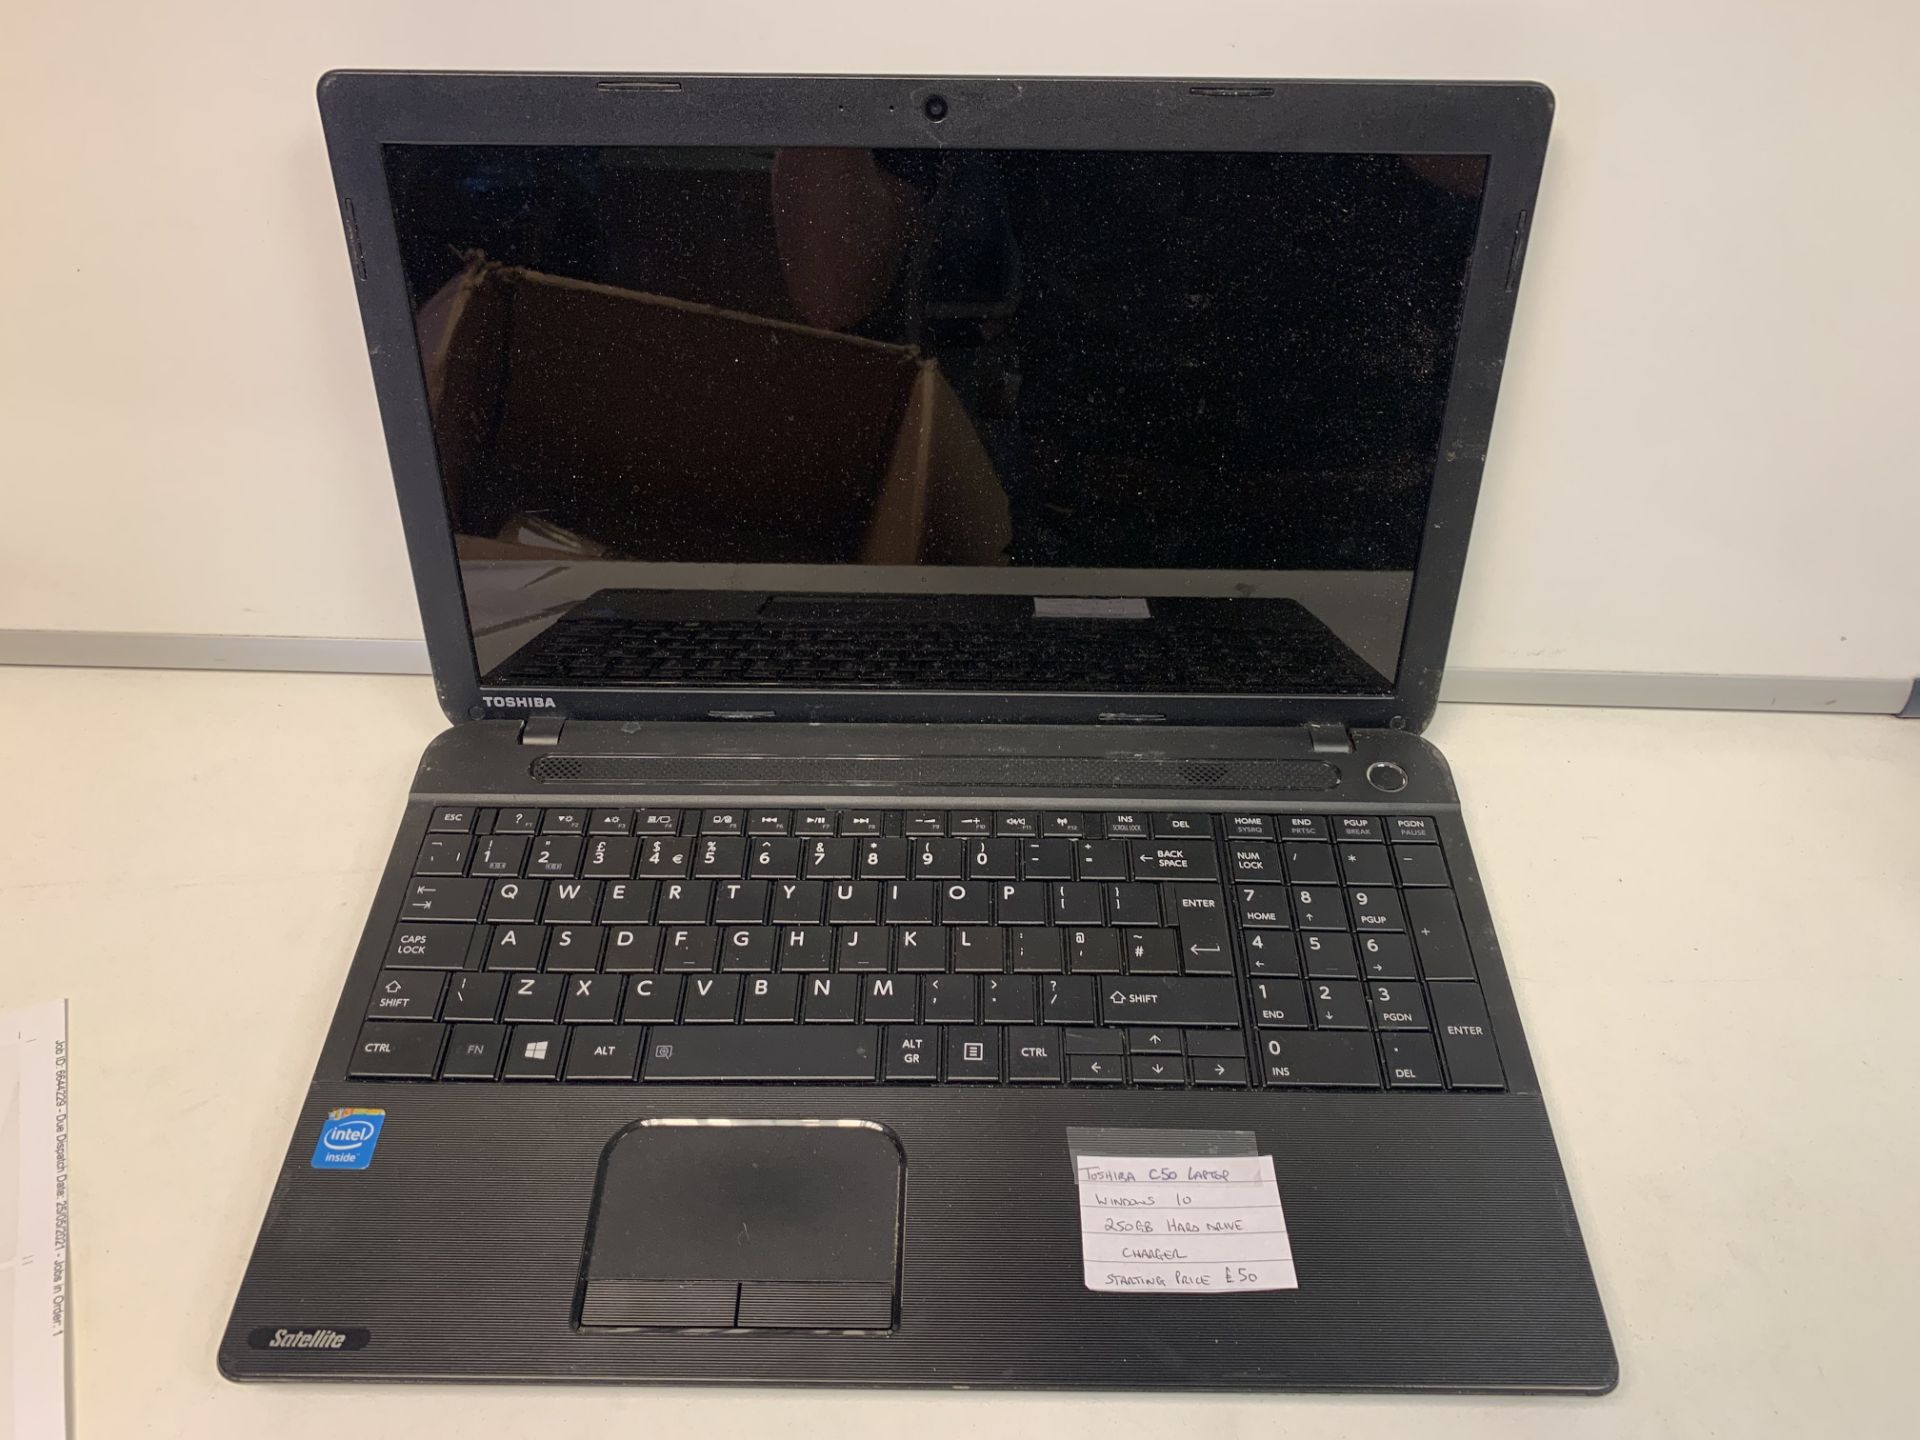 TOSHIBA C50 LAPTOP, WINDOWS 10, 250GB HARD DRIVE WITH CHARGER